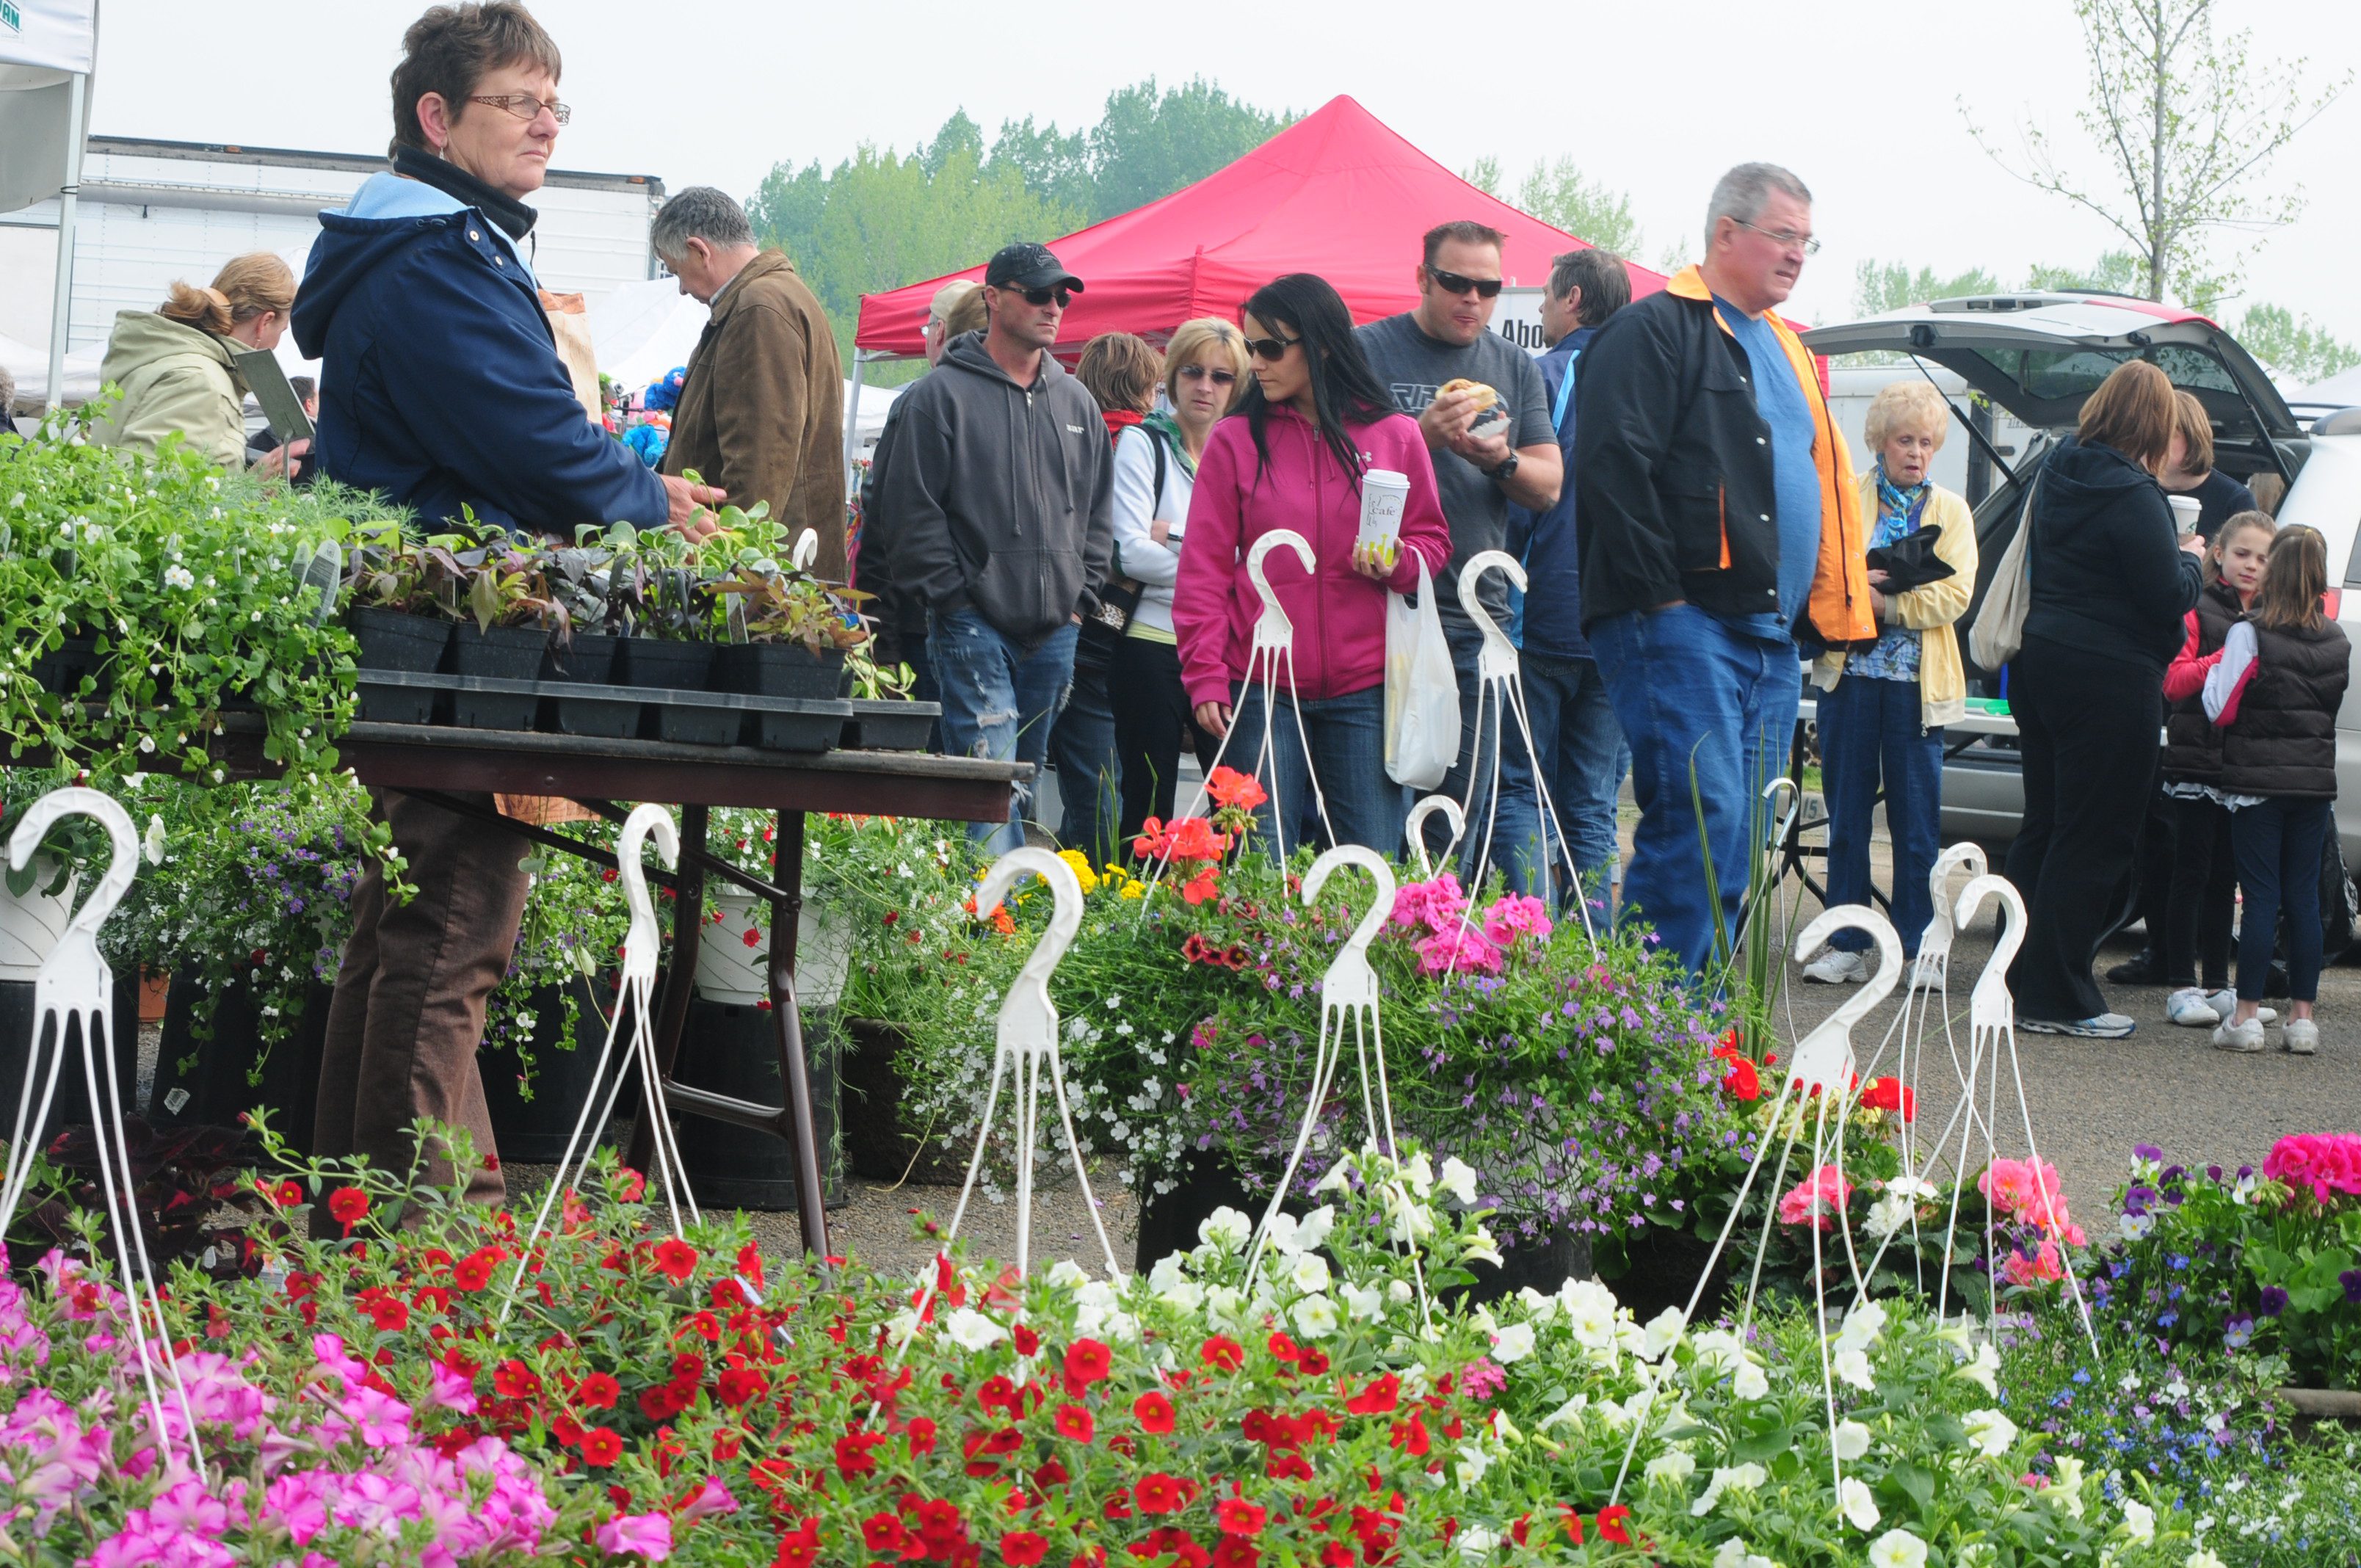 COLOURFUL- A beautiful display of hanging baskets along with other flowers were on display at the Red Deer Public Market this past weekend where many Red Deerians flocked to get a taste of fresh grown products and hand made items.